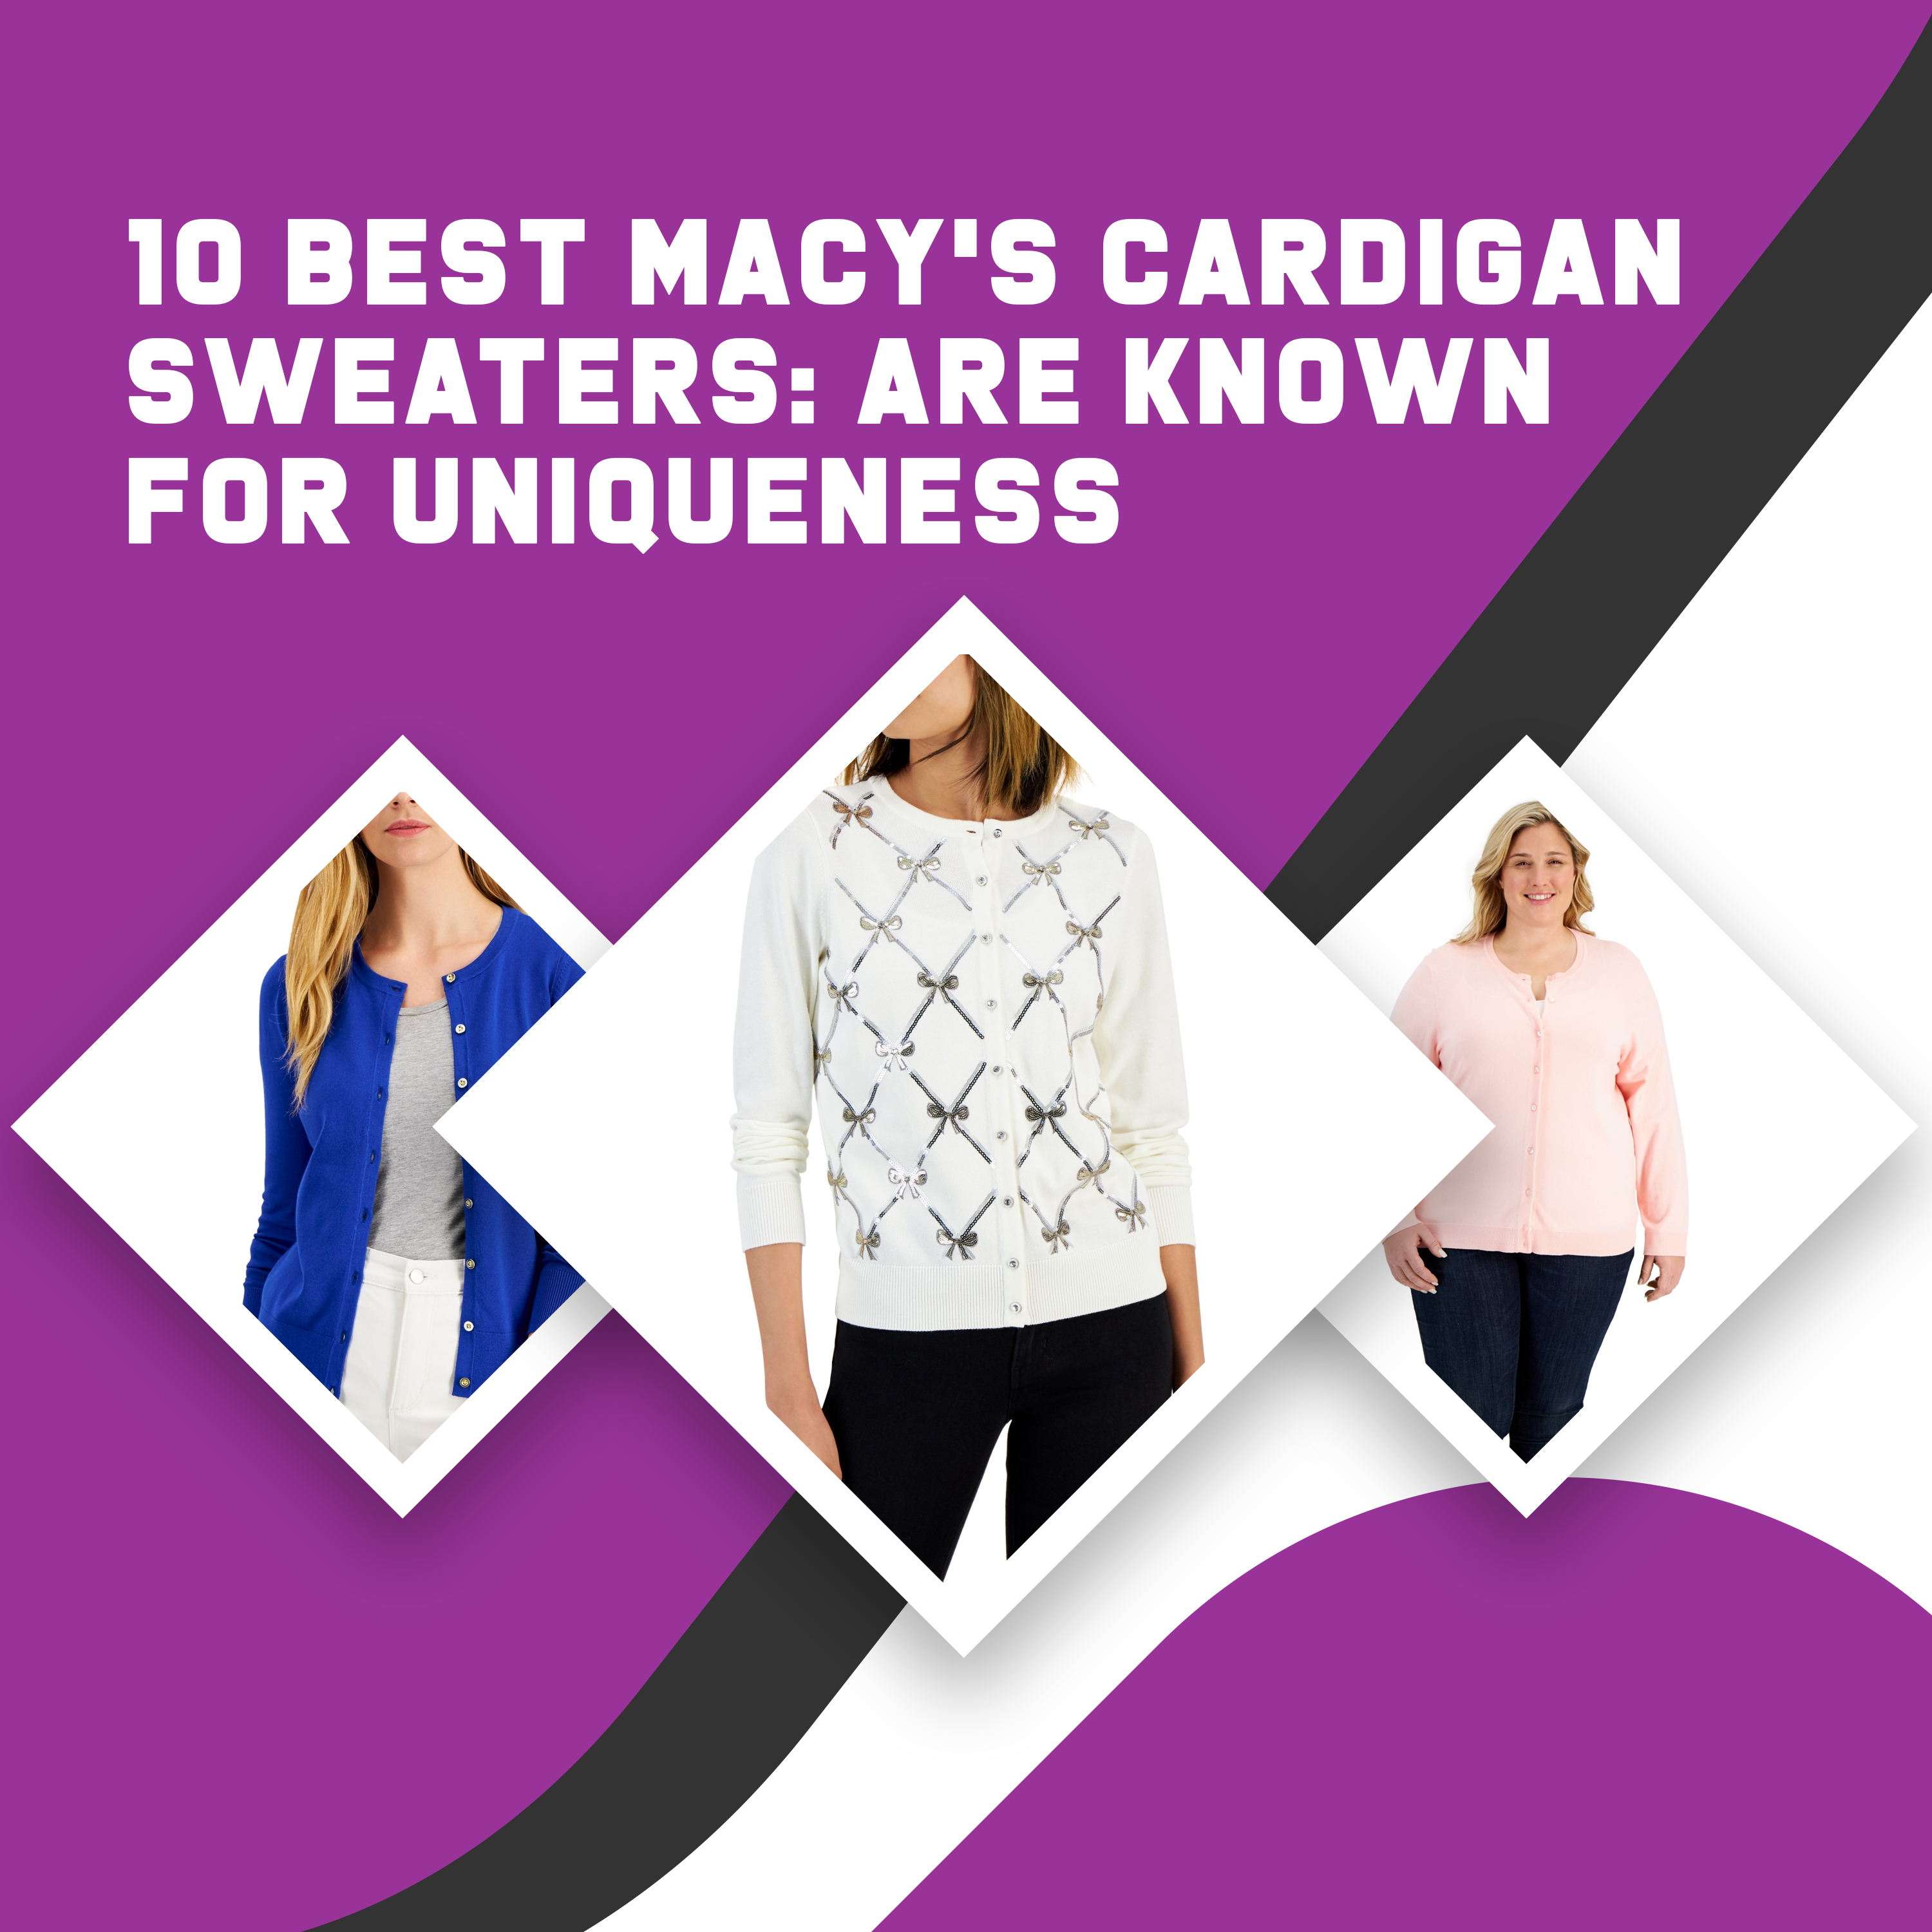 10 Best Macy’s Cardigan Sweaters: Are Known For Uniqueness